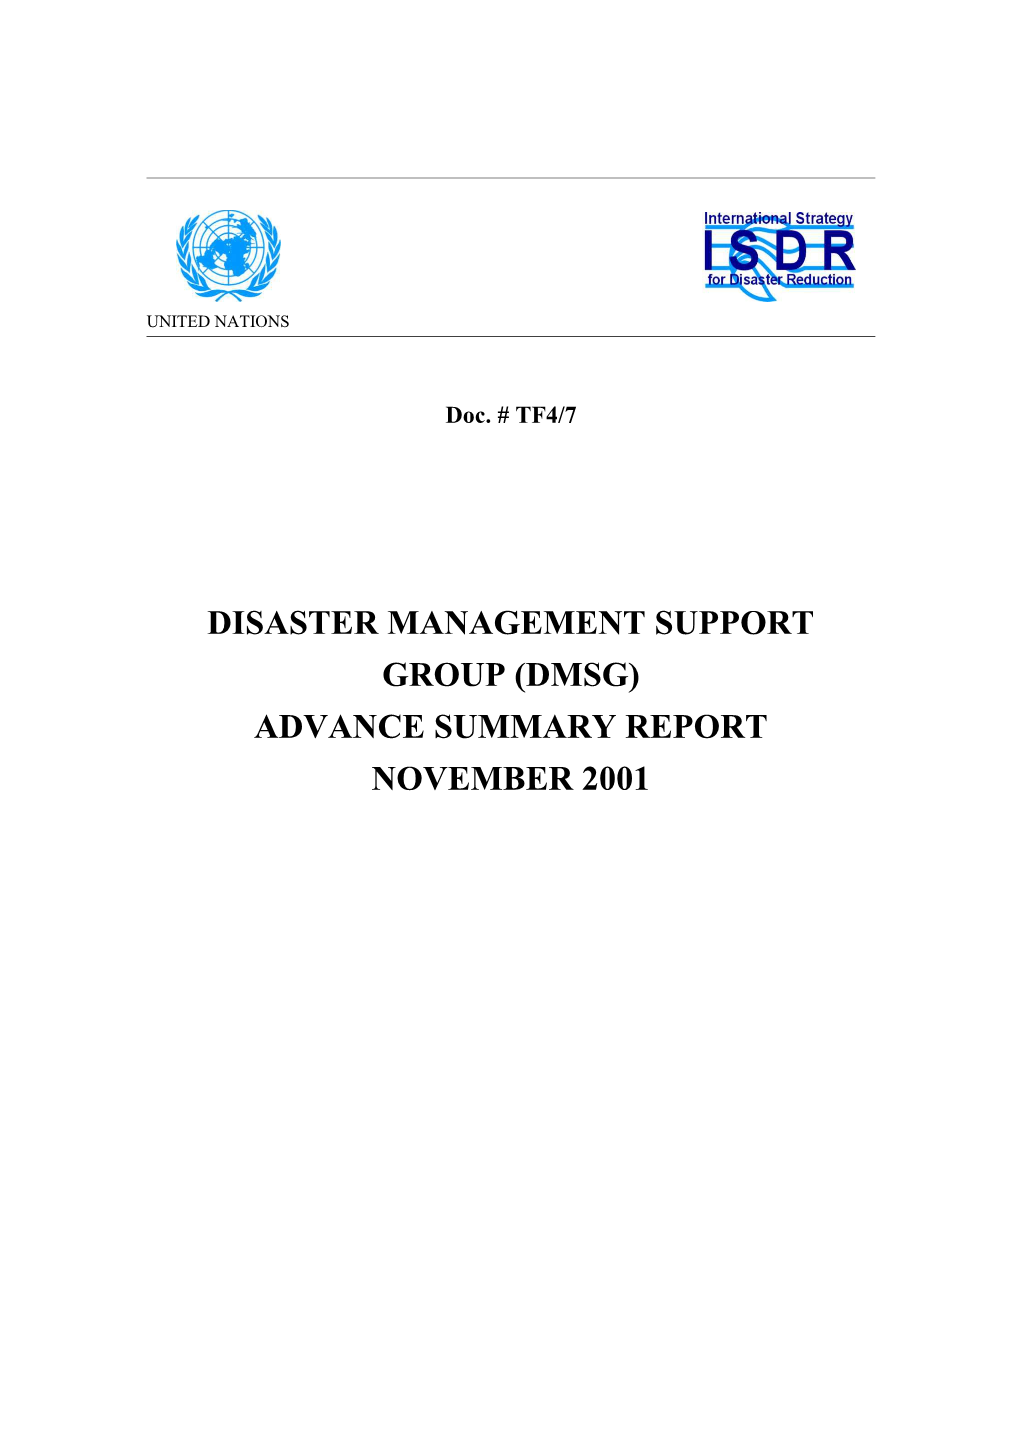 Disaster Management Support Group (Dmsg) Report to November 2001 Ceos Plenary